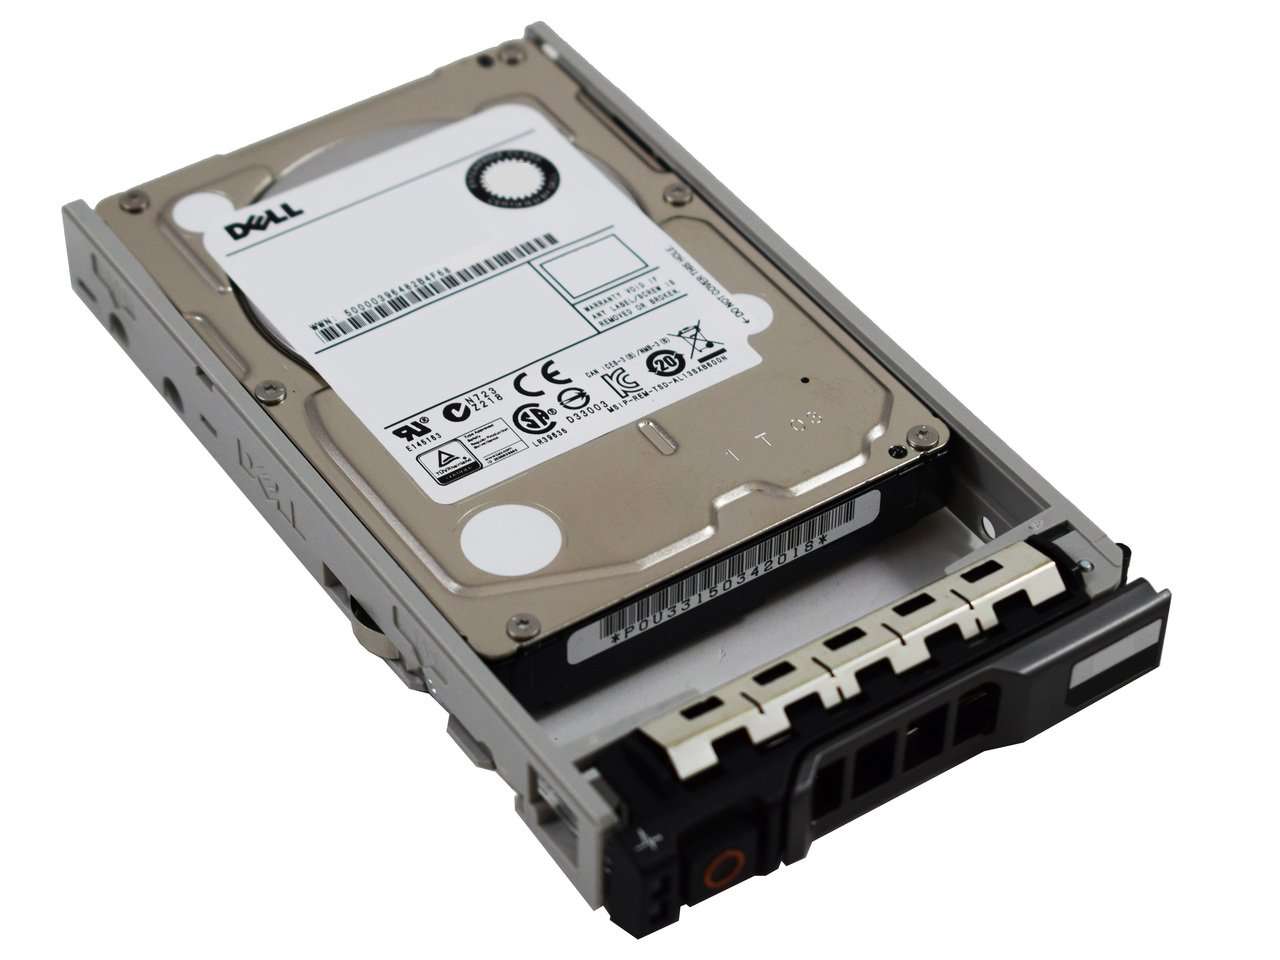 Dell G13 400-21564 600GB 10K RPM SAS 6Gb/s 512n 2.5" Manufacturer Recertified HDD